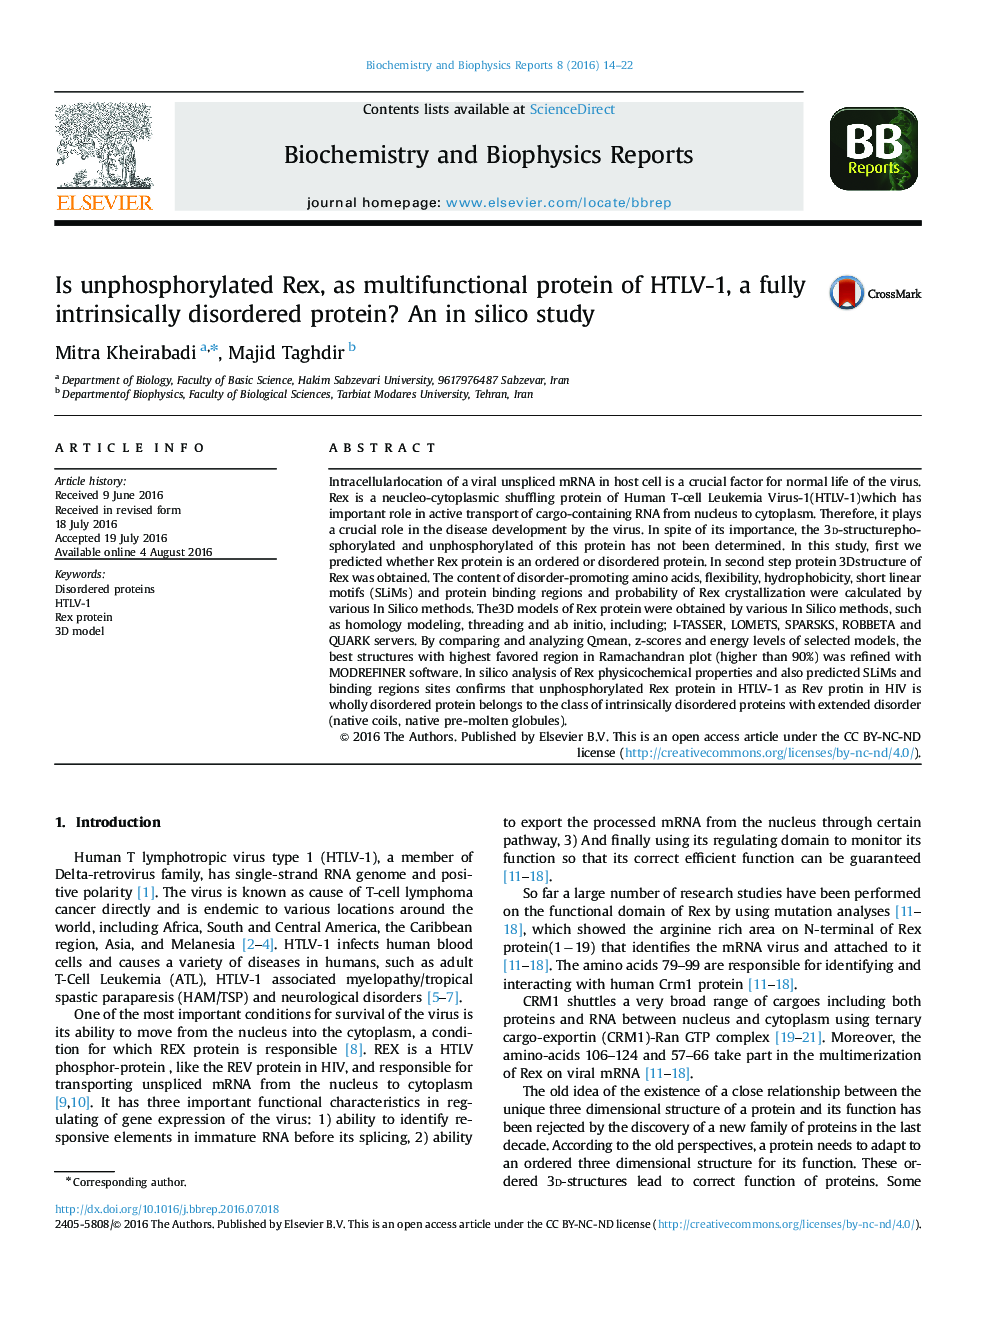 Is unphosphorylated Rex, as multifunctional protein of HTLV-1, a fully intrinsically disordered protein? An in silico study